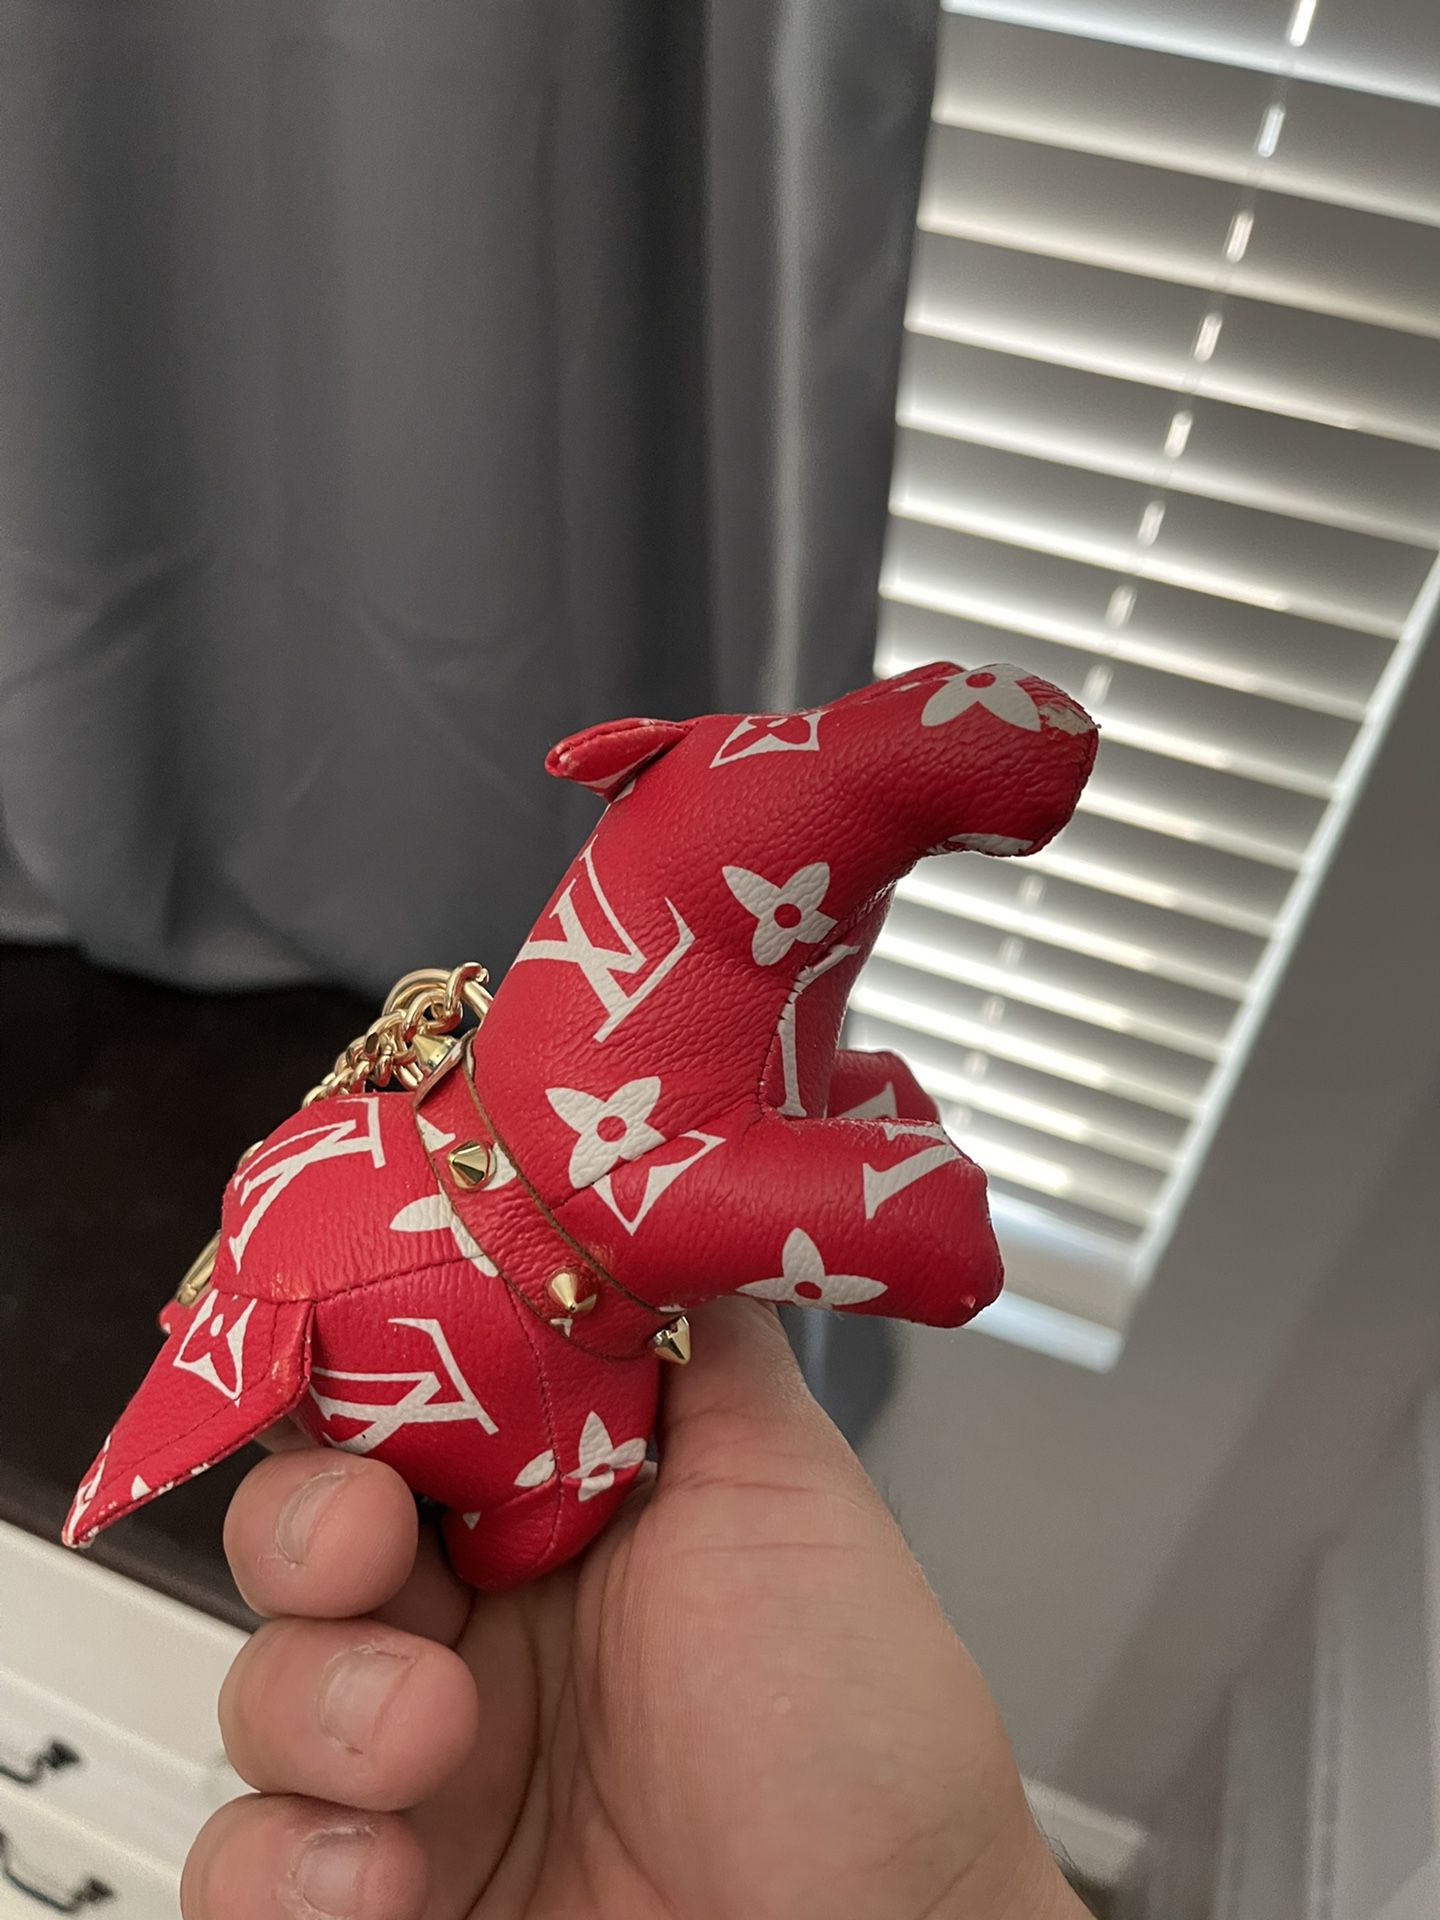 FOR SALE LV Falun Dog Keyring Charm - MTC Beauty Products